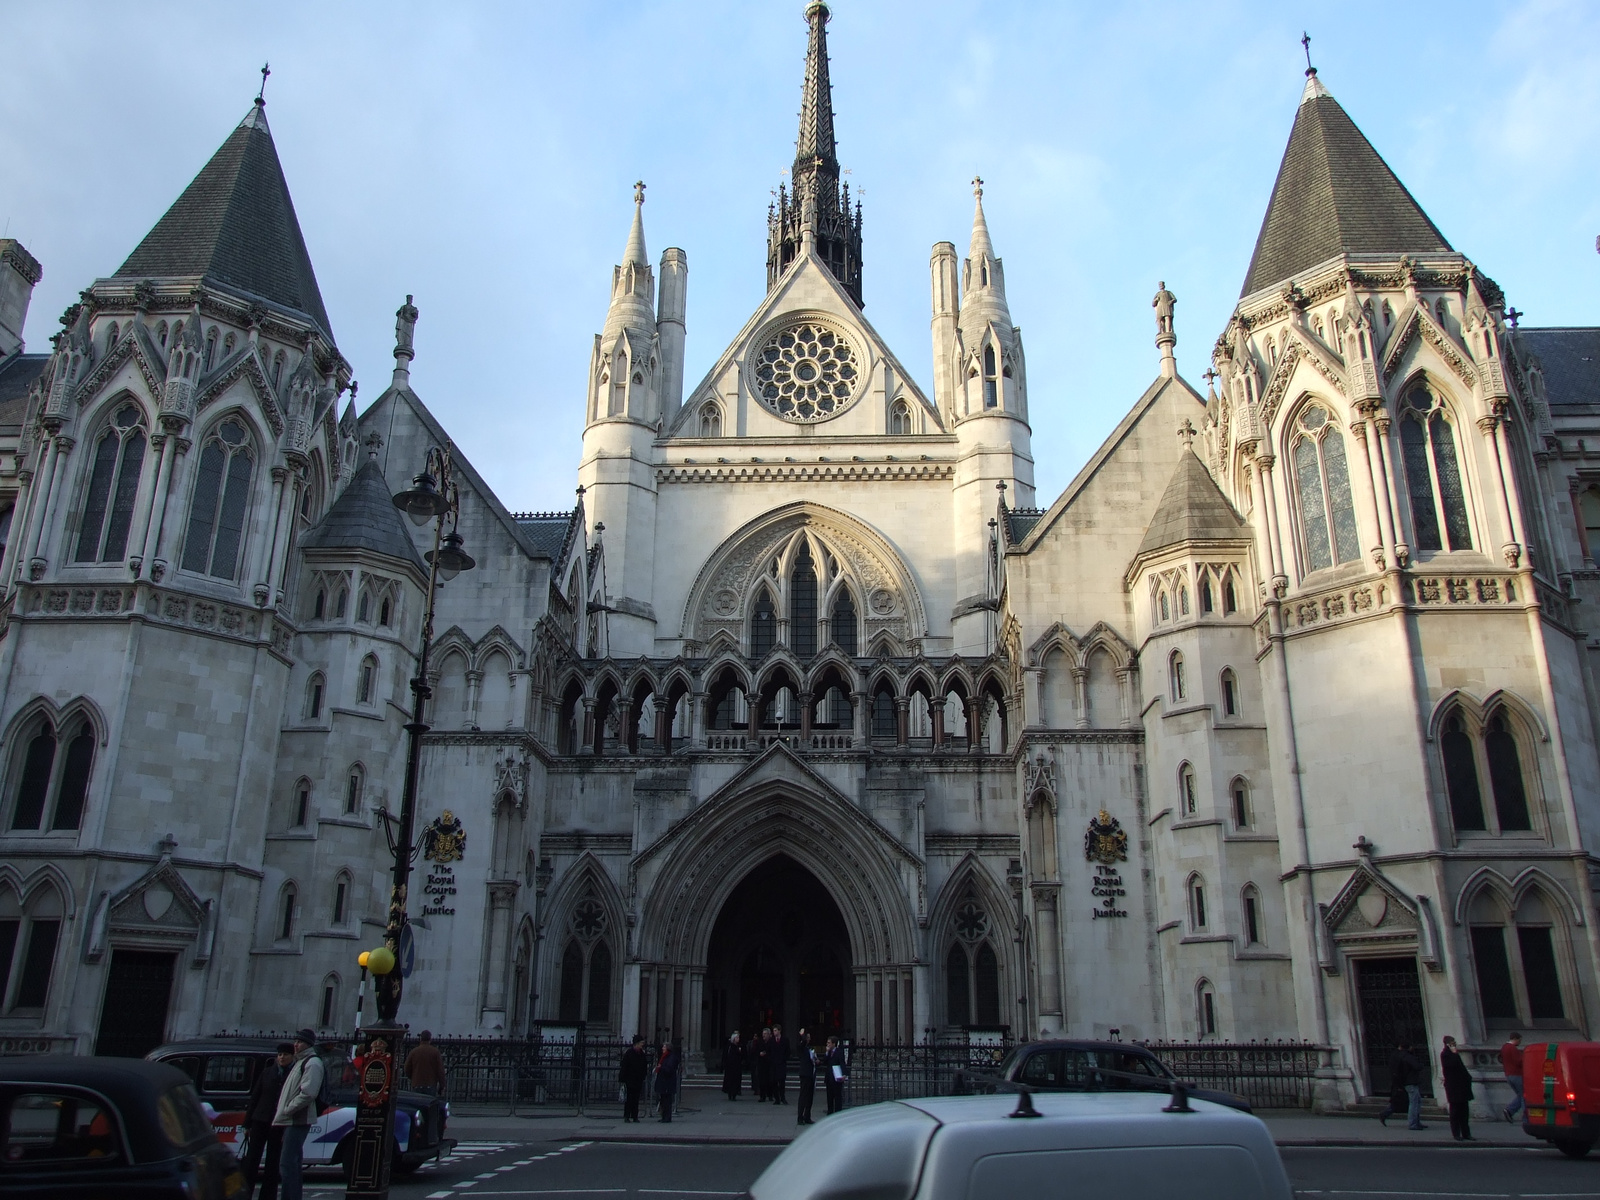 The Royal Courts of Justice (1)